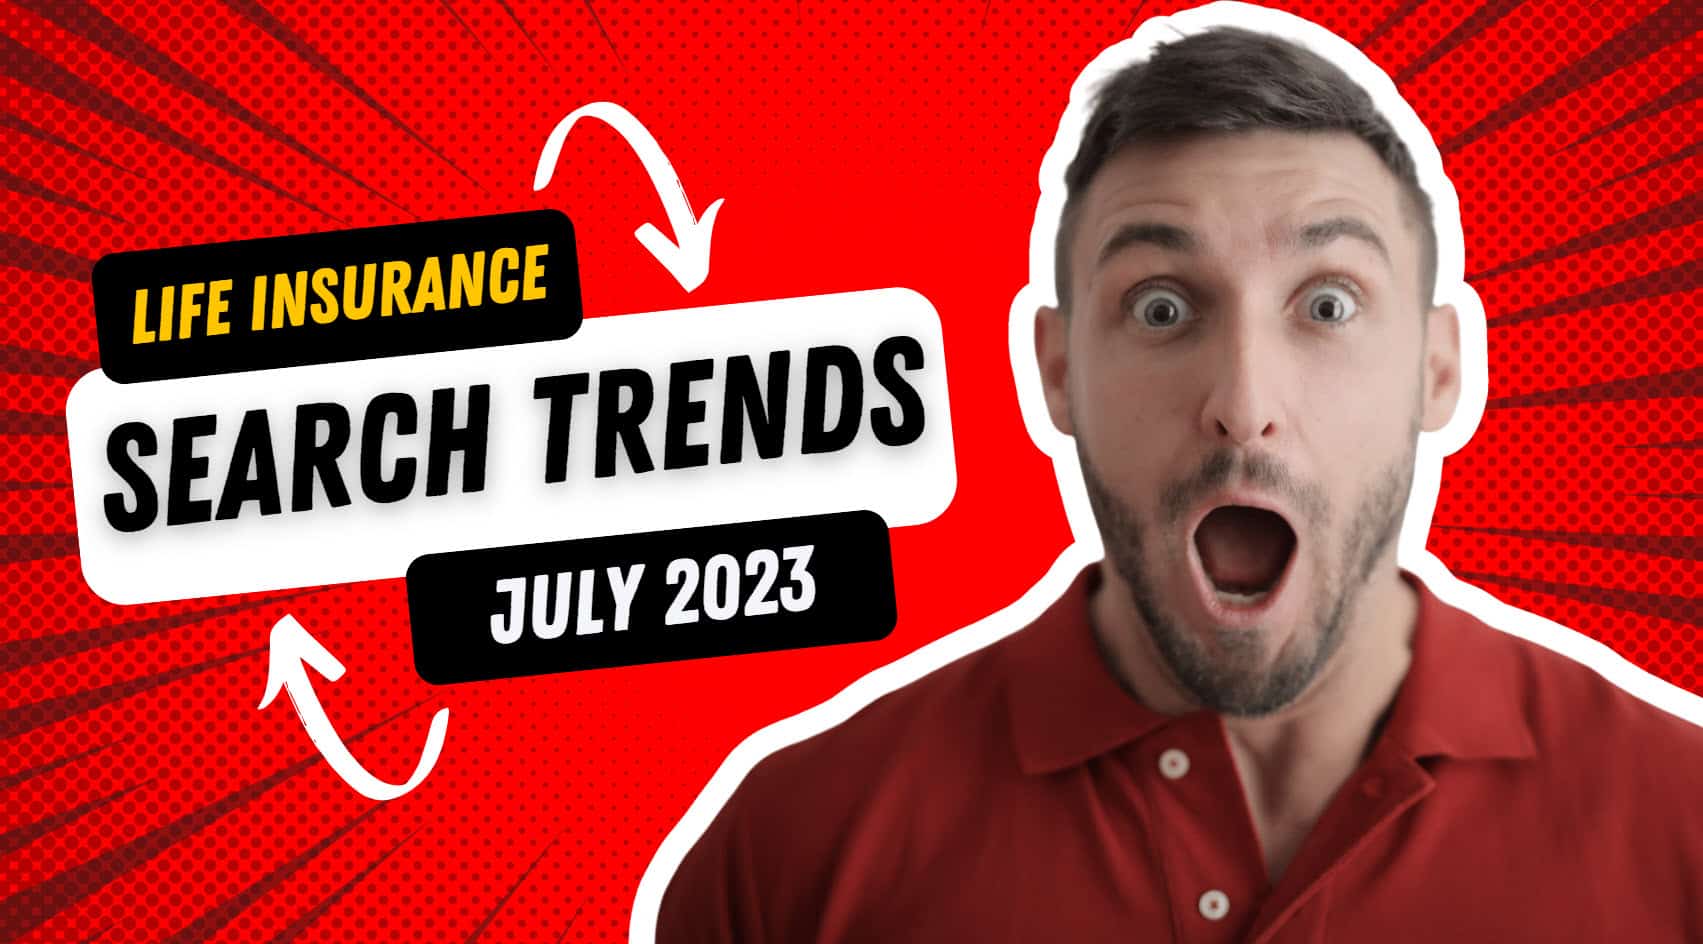 Insights On Life Insurance Search Trends: July 2023